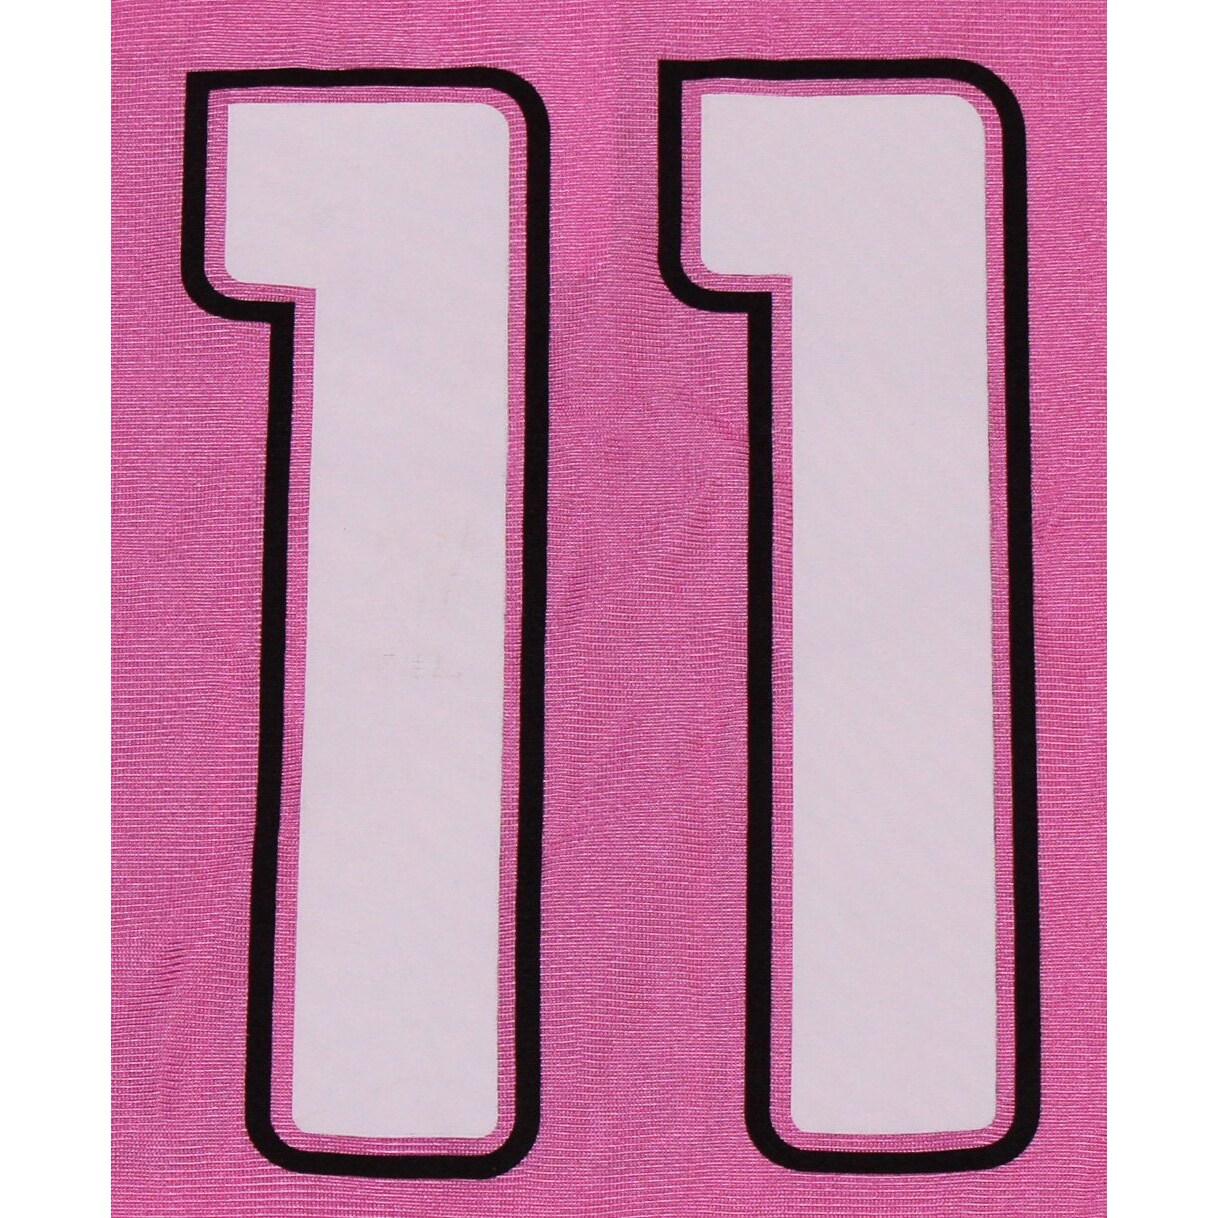 larry fitzgerald pink jersey